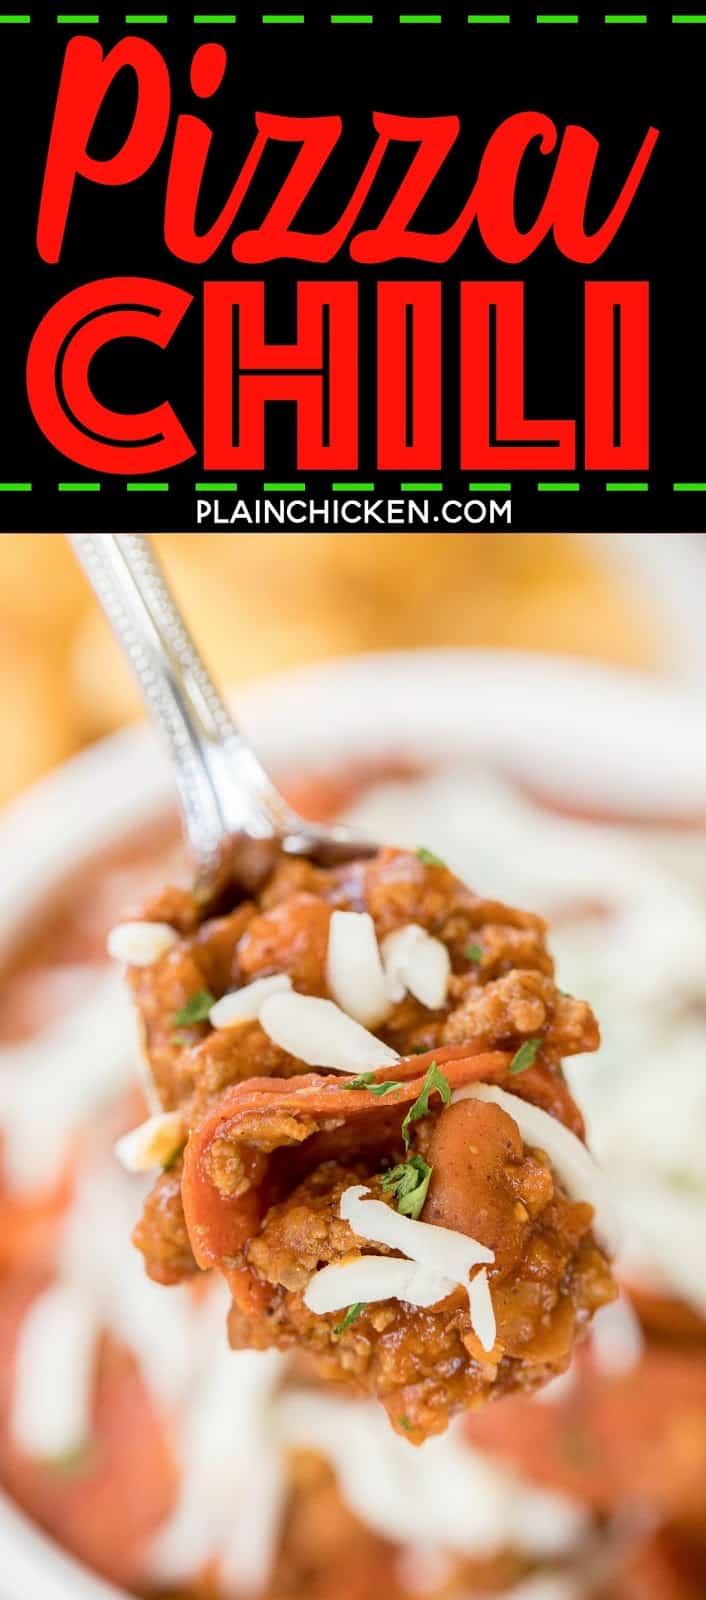 Pizza Chili - pizza and chili together in one delicious dish! Ground beef, sausage, pepperoni, garlic, salsa, pizza sauce, chili powder. Ready in about 30 minutes! Can also make in the slow cooker. Great for potlucks and tailgating! Top with mozzarella cheese or some ricotta cheese. Serve with some crusty garlic bread for a quick and easy meal that the whole family will LOVE!!! Freeze leftovers for a quick meal later!